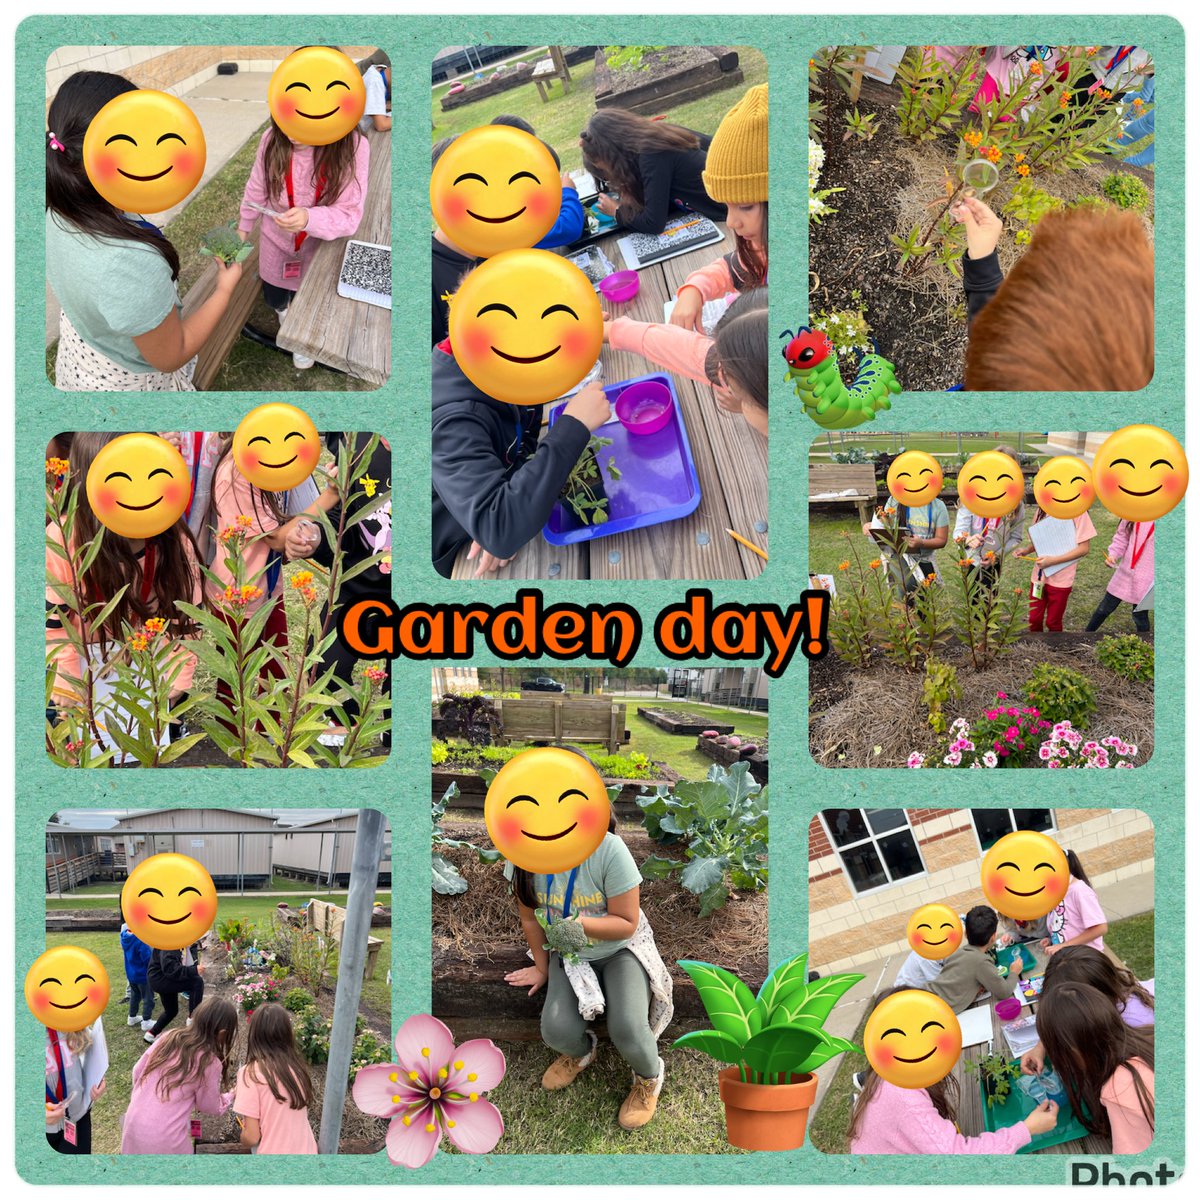 Garden day @CFISDAndre!! We love visiting our garden. We learned about bluebonnets and tasted some yummy lettuce. Our favorite was seeing the caterpillars in action. @CyFairISD @CFISDScience @CFISDELs @readygrowgarden @MsPaoliVegaRTGG @mrsnewcfisd #LeopardsLEAD